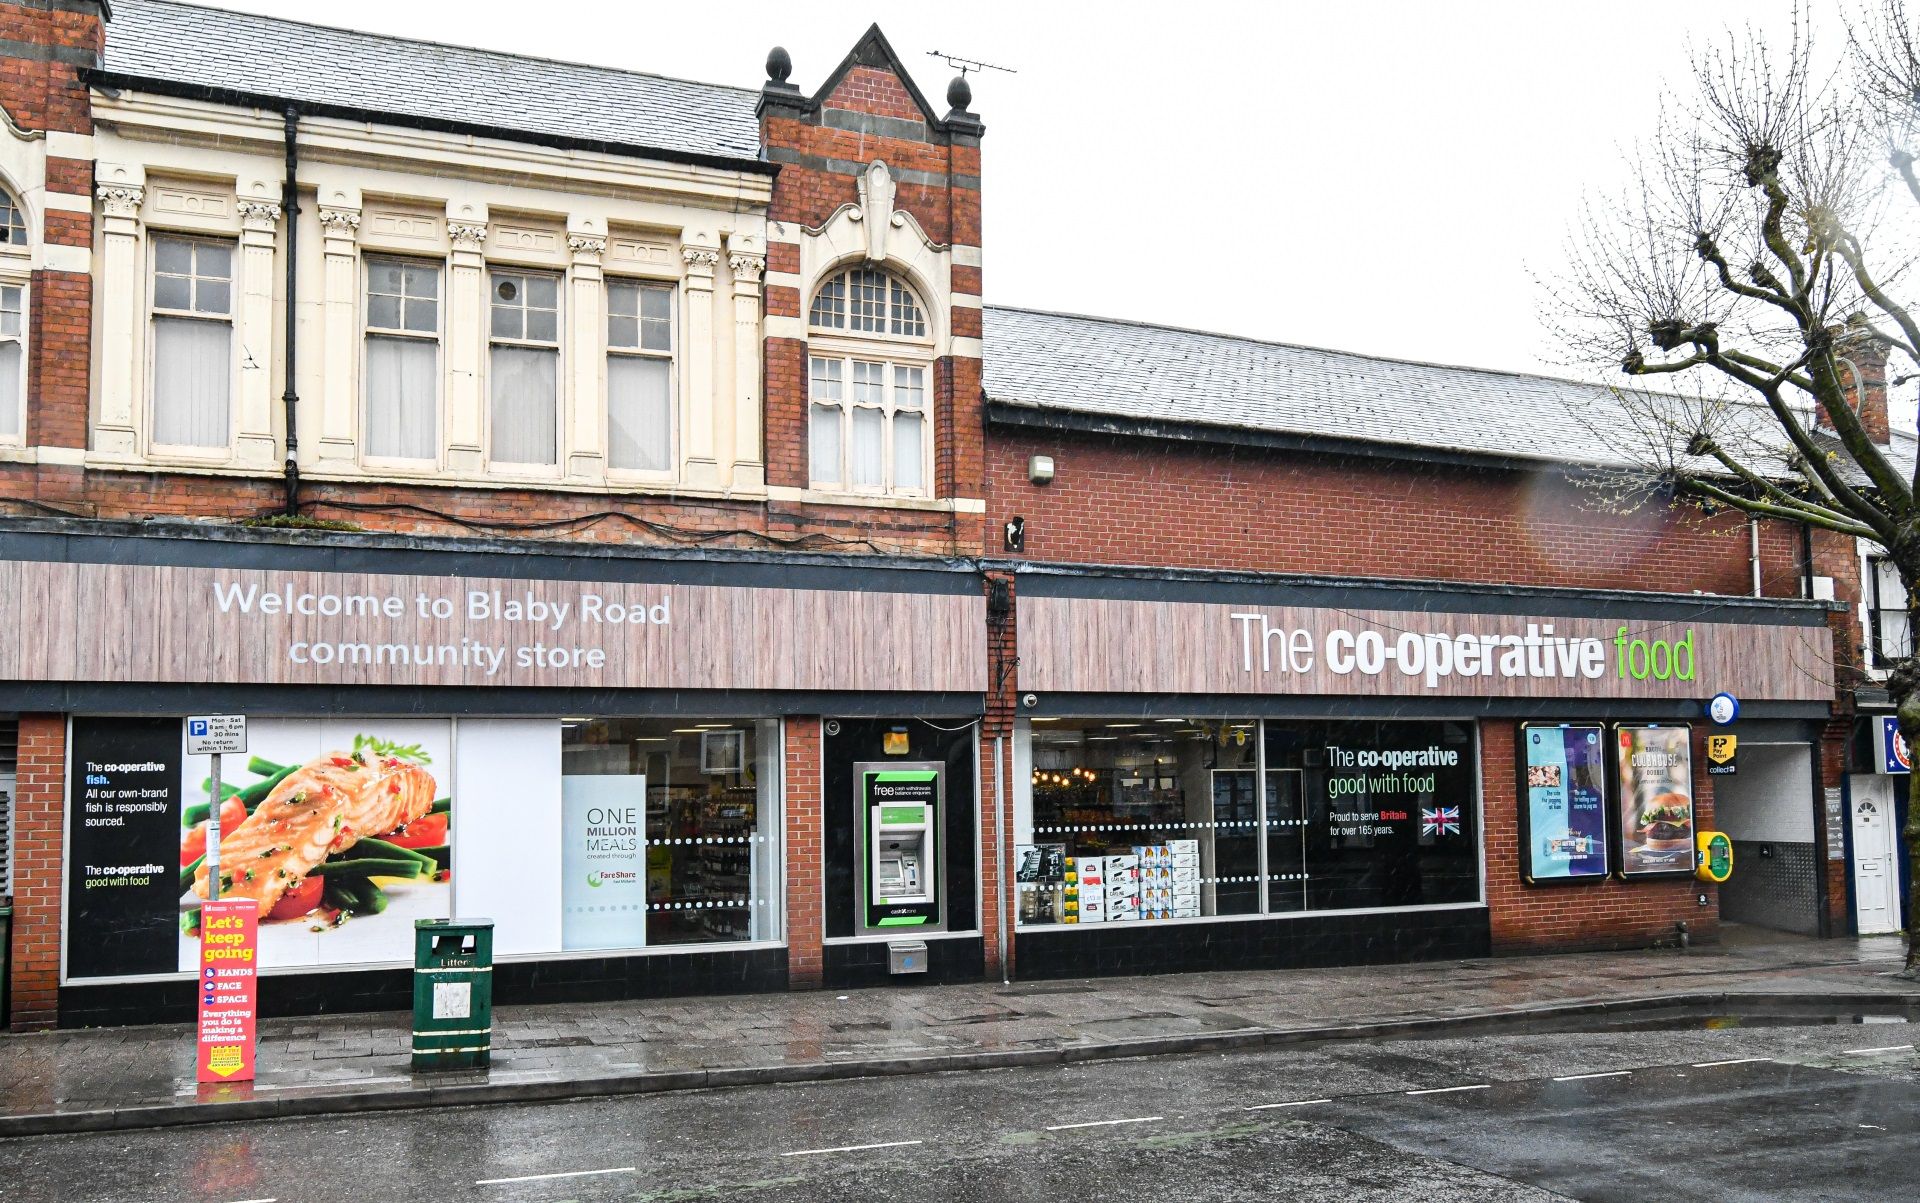 Leicestershire food store gets fresh new look with £156k makeover